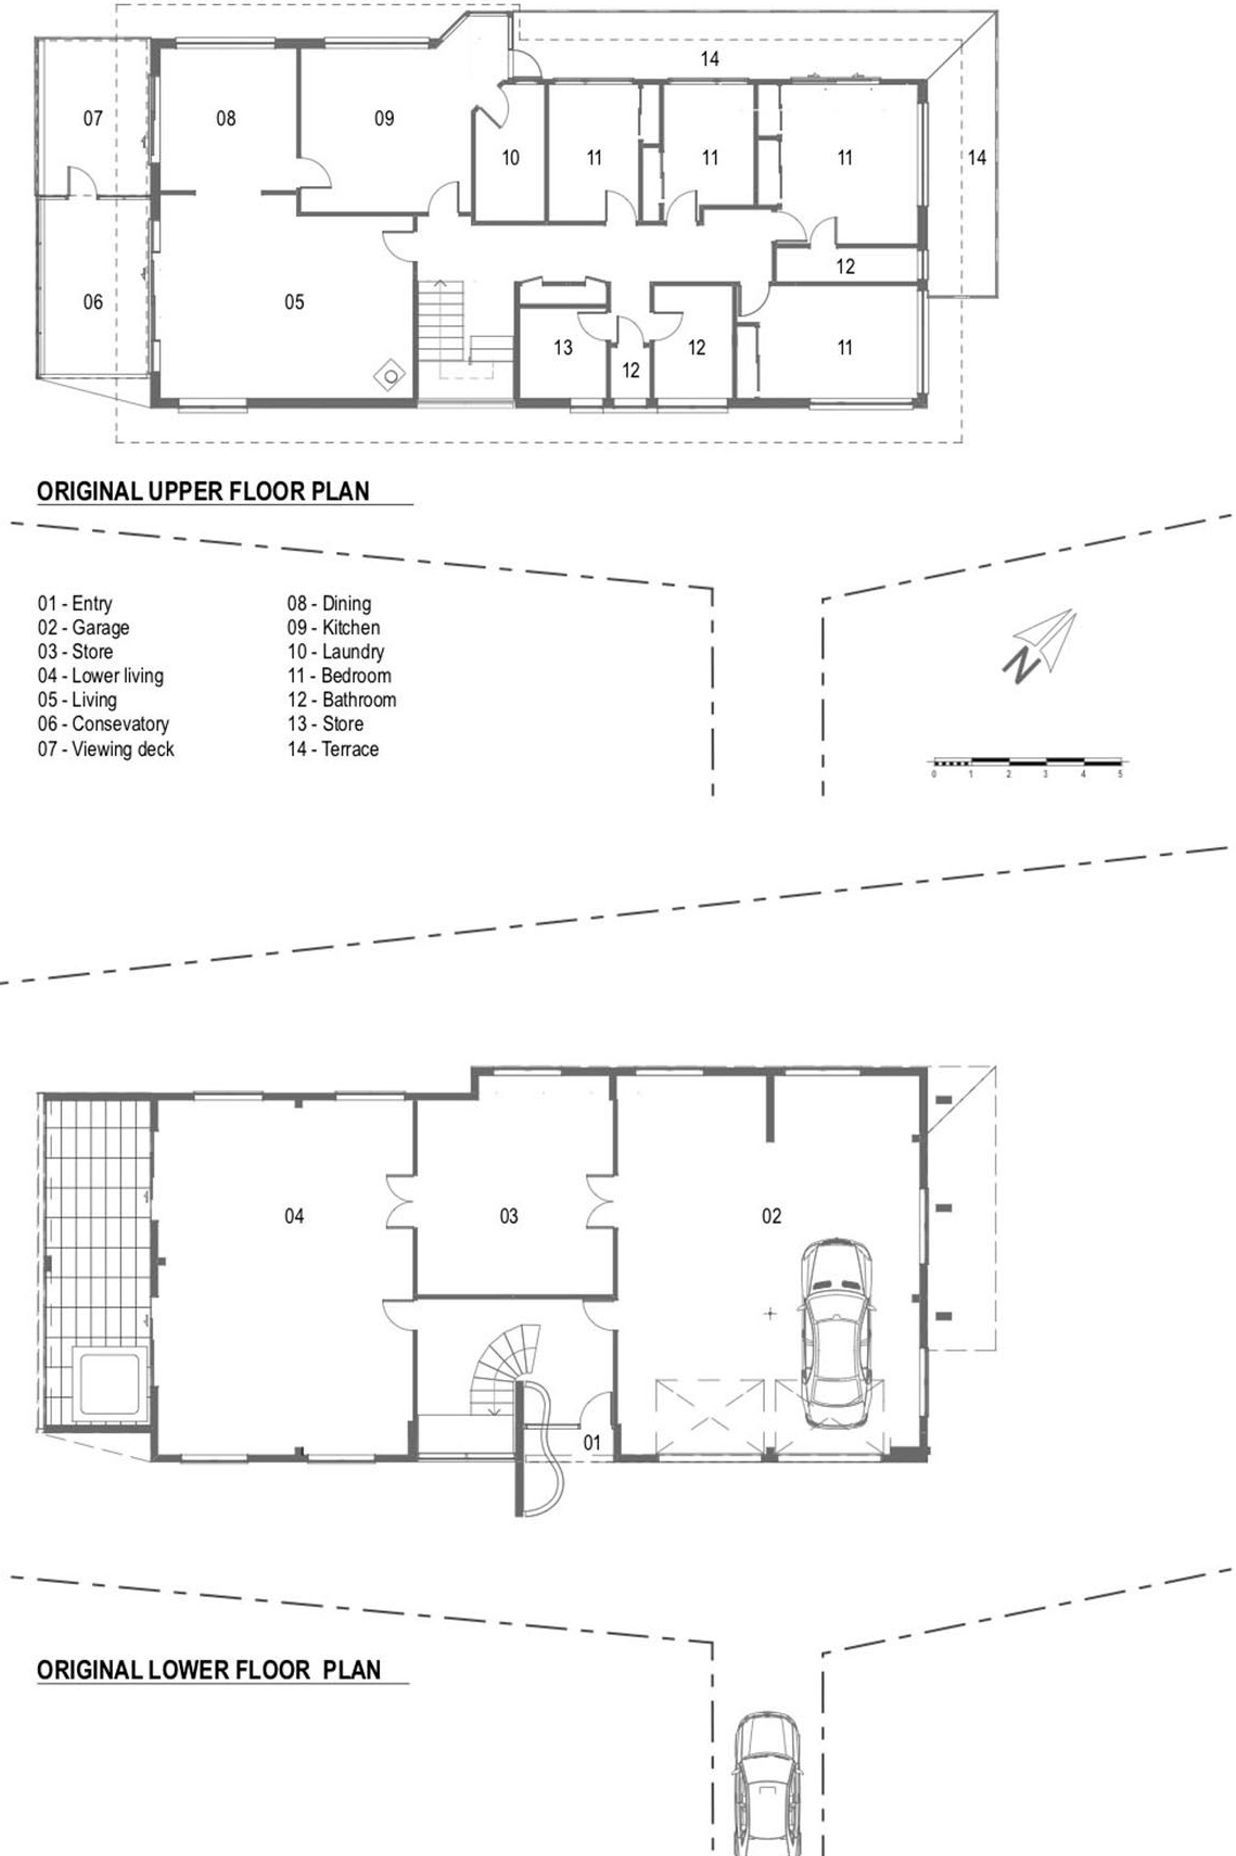 The upper and lower floor plans of the original brick-and-tile home, by Lloyd Hartley.